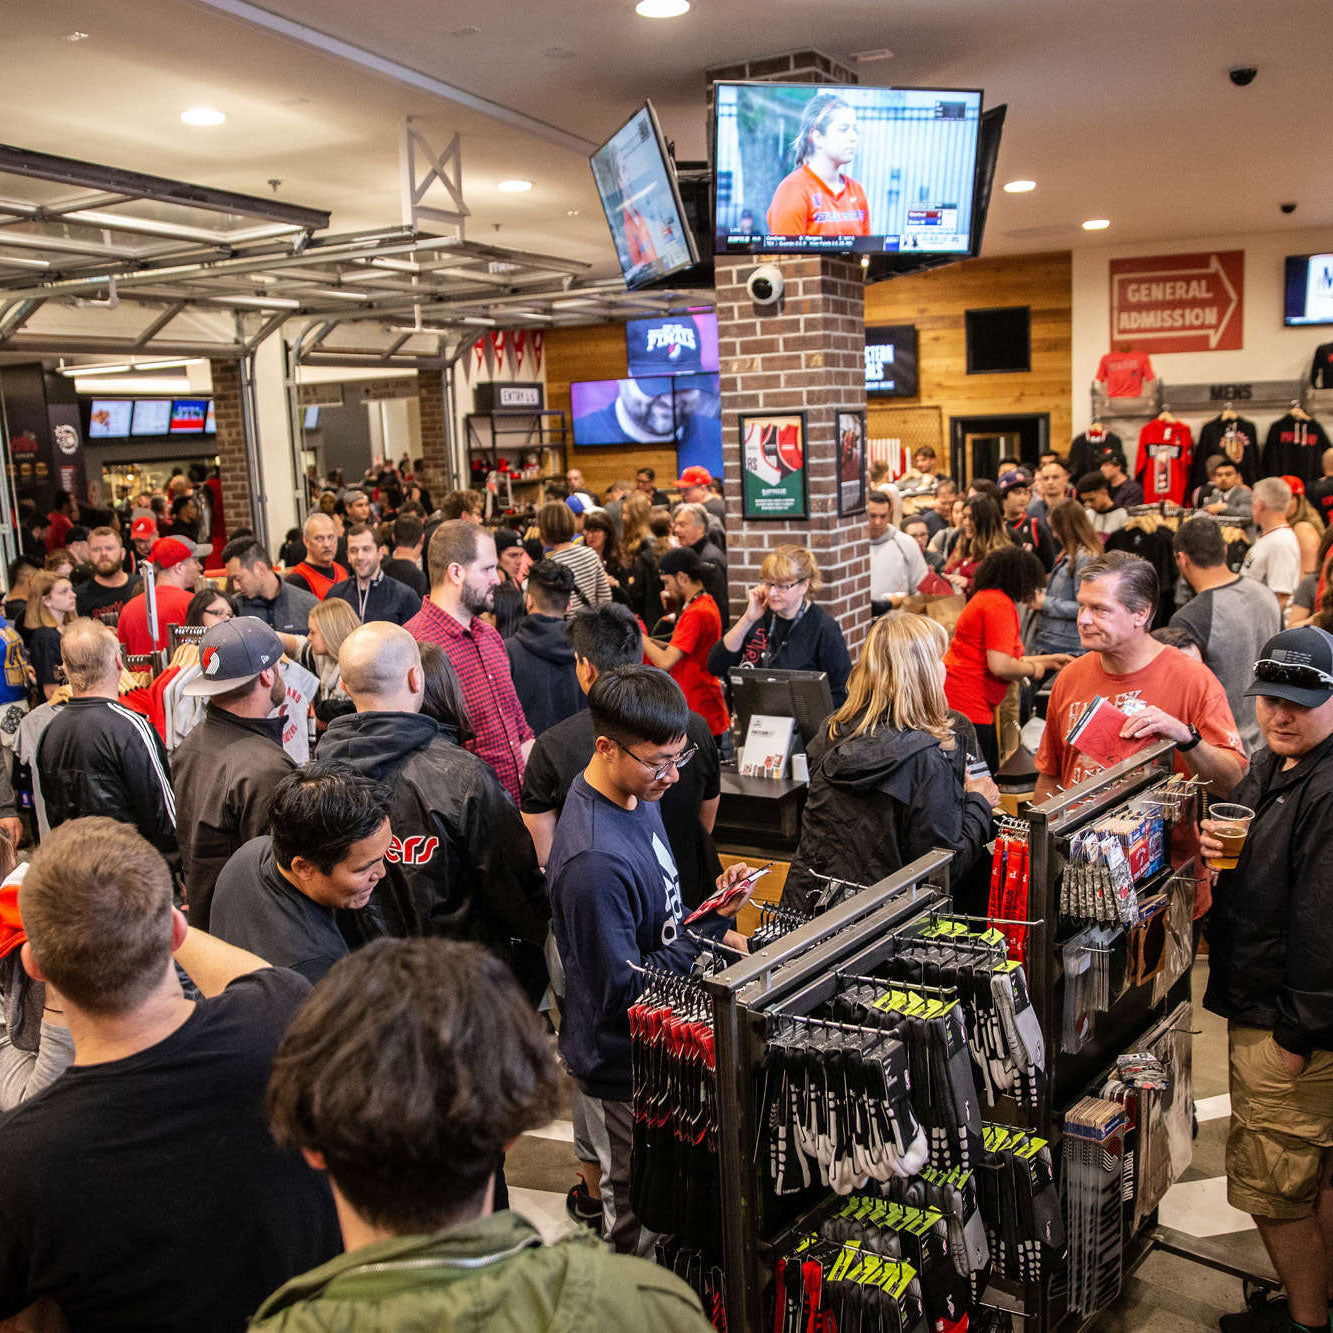 crowd in store